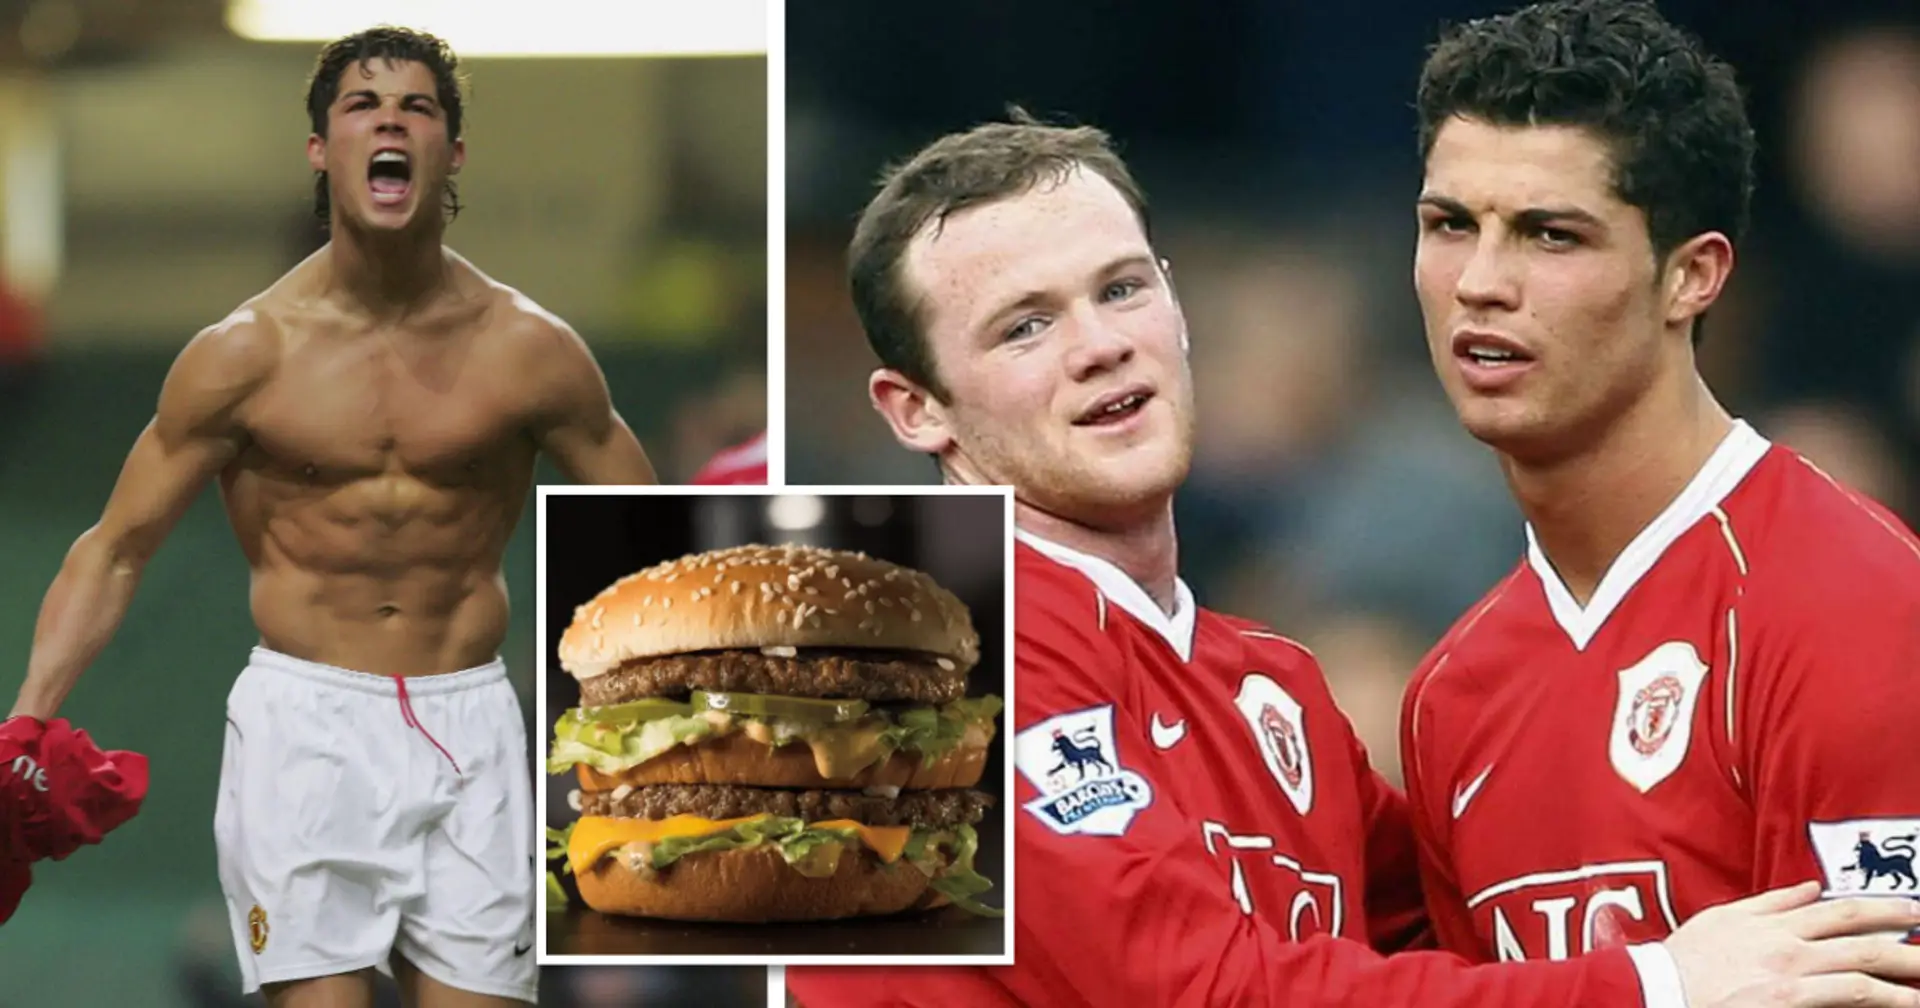 Wayne Rooney reveals why he took Cristiano Ronaldo to McDonald’s while they were playing together at Manchester United